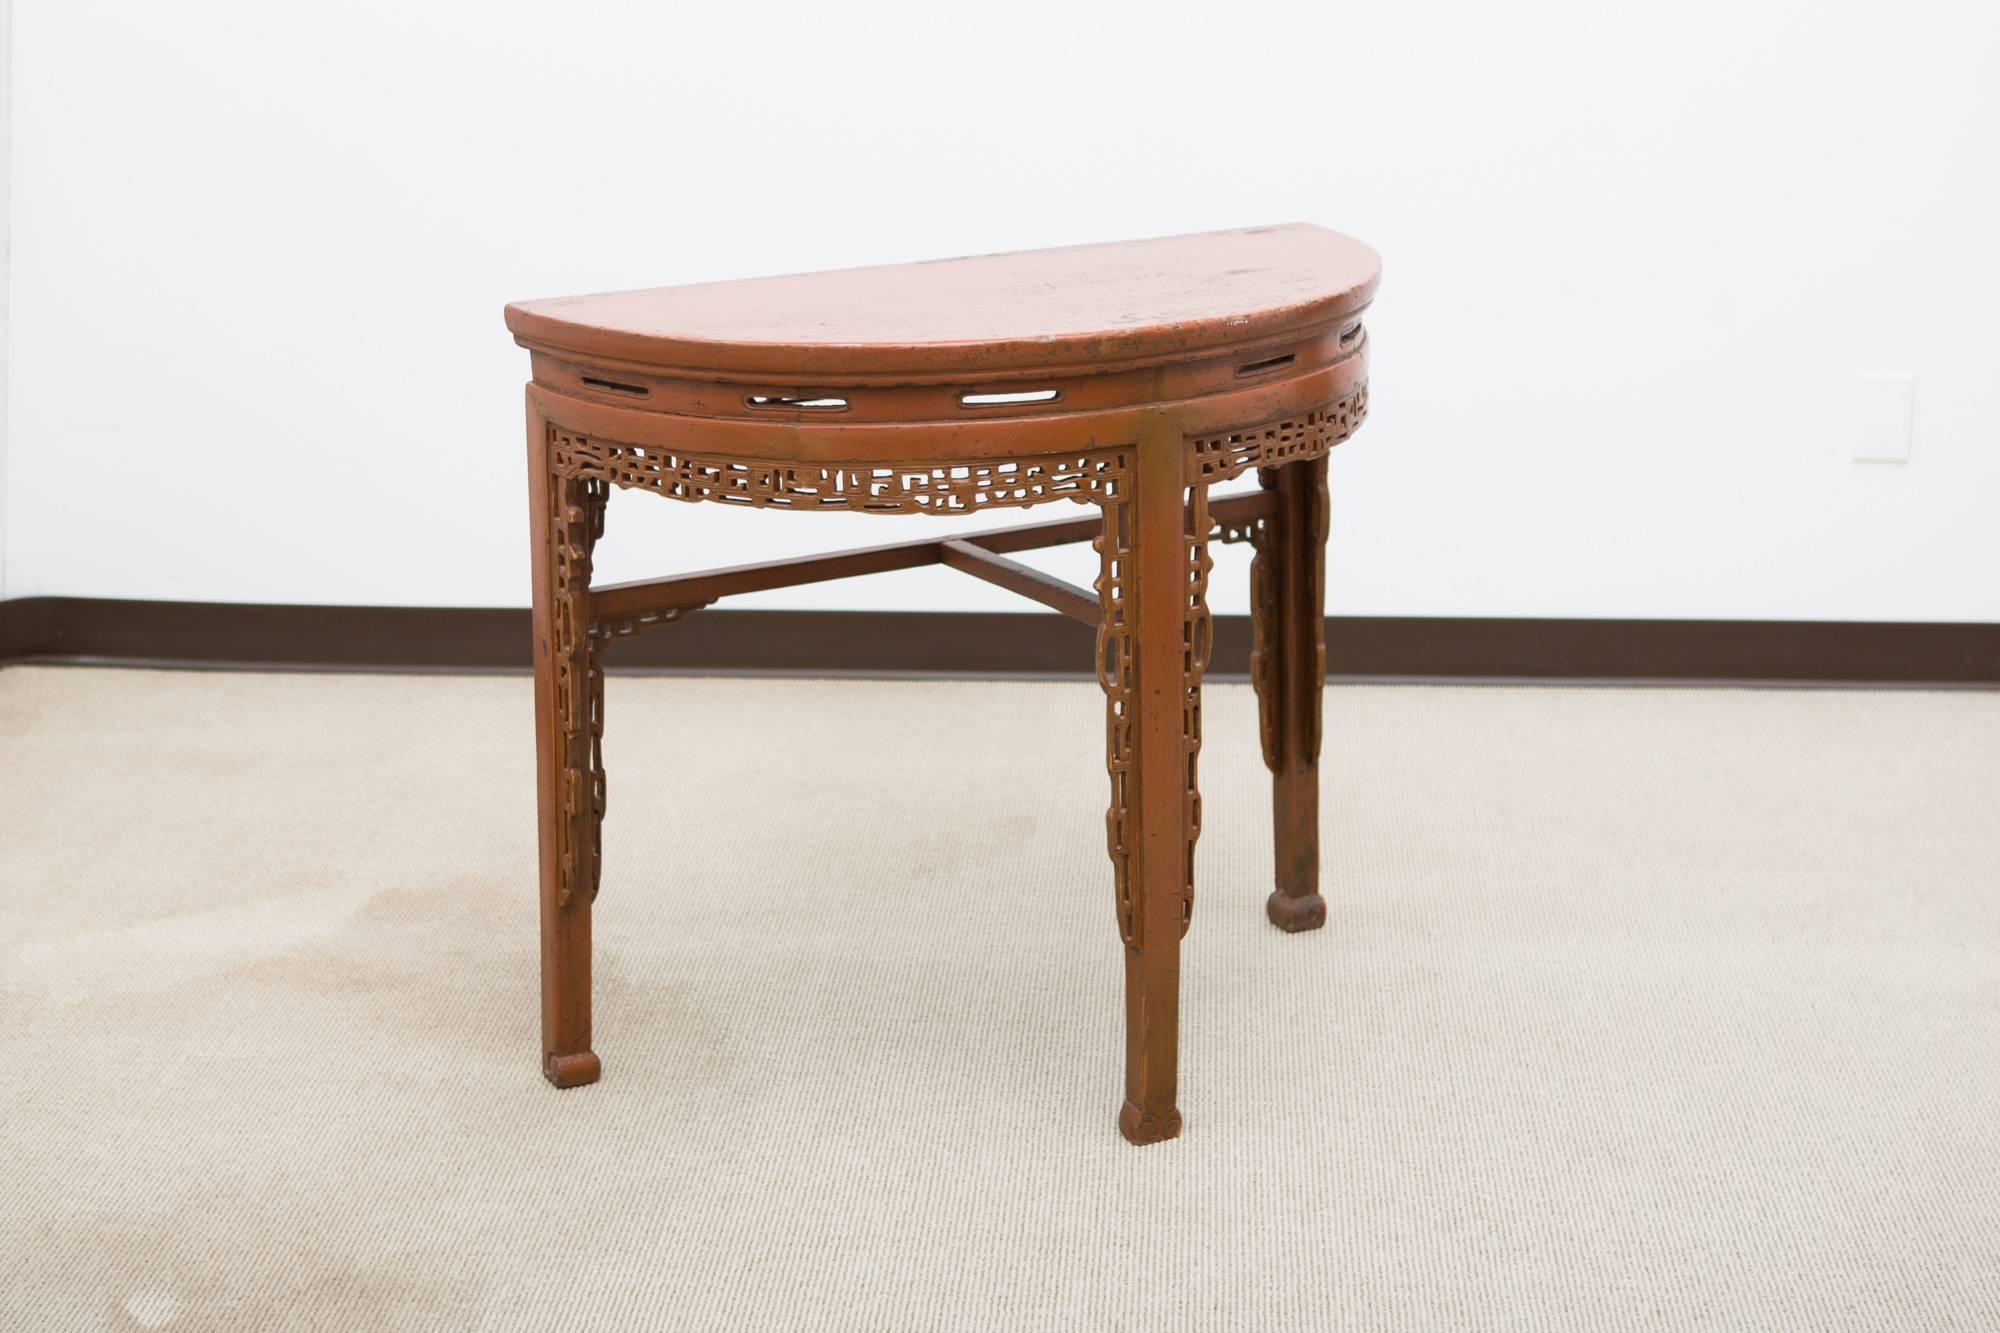 Painted 19th century, Chinese demilune console with three legs and great carved detailing on legs and apron.